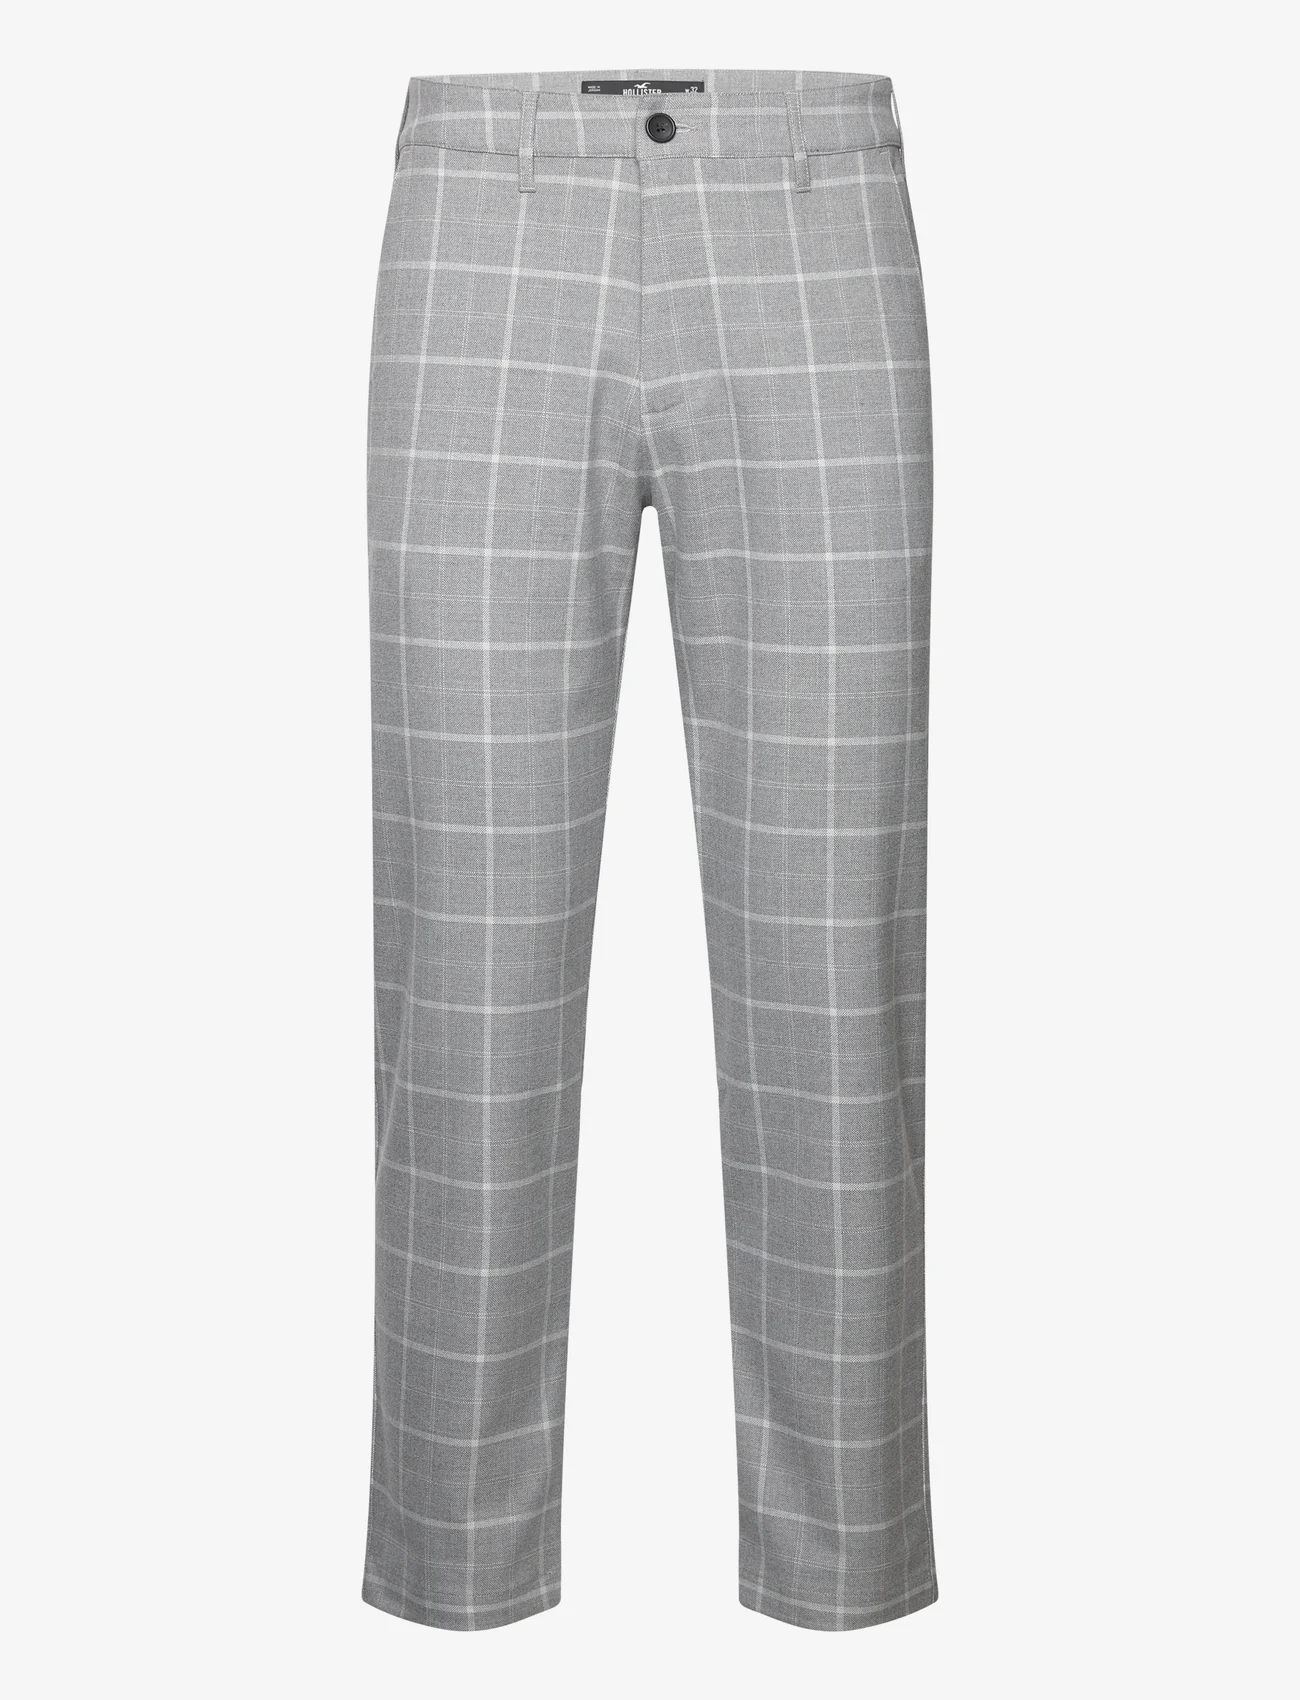 Hollister - HCo. GUYS PANTS - suit trousers - grey plaid - 0